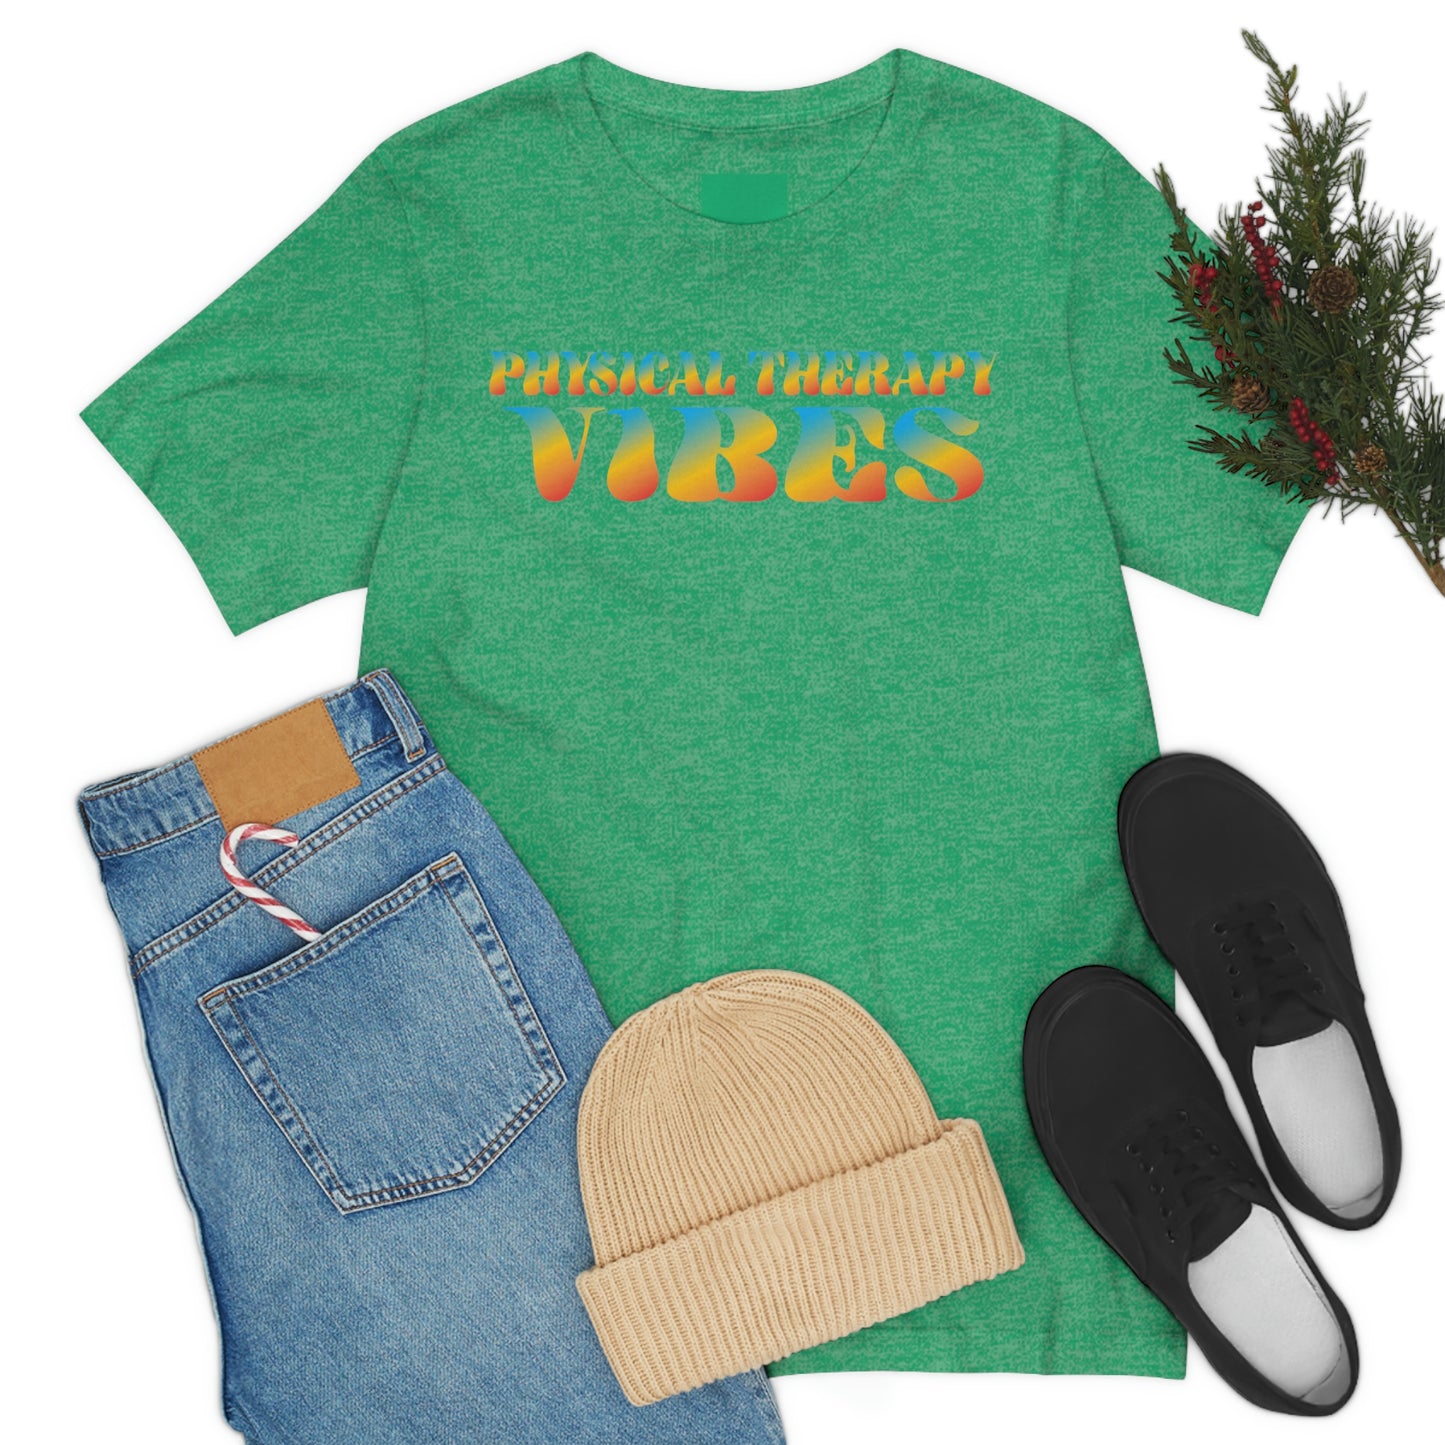 Physical Therapy Vibes Retro Shirt PT PTA Therapist